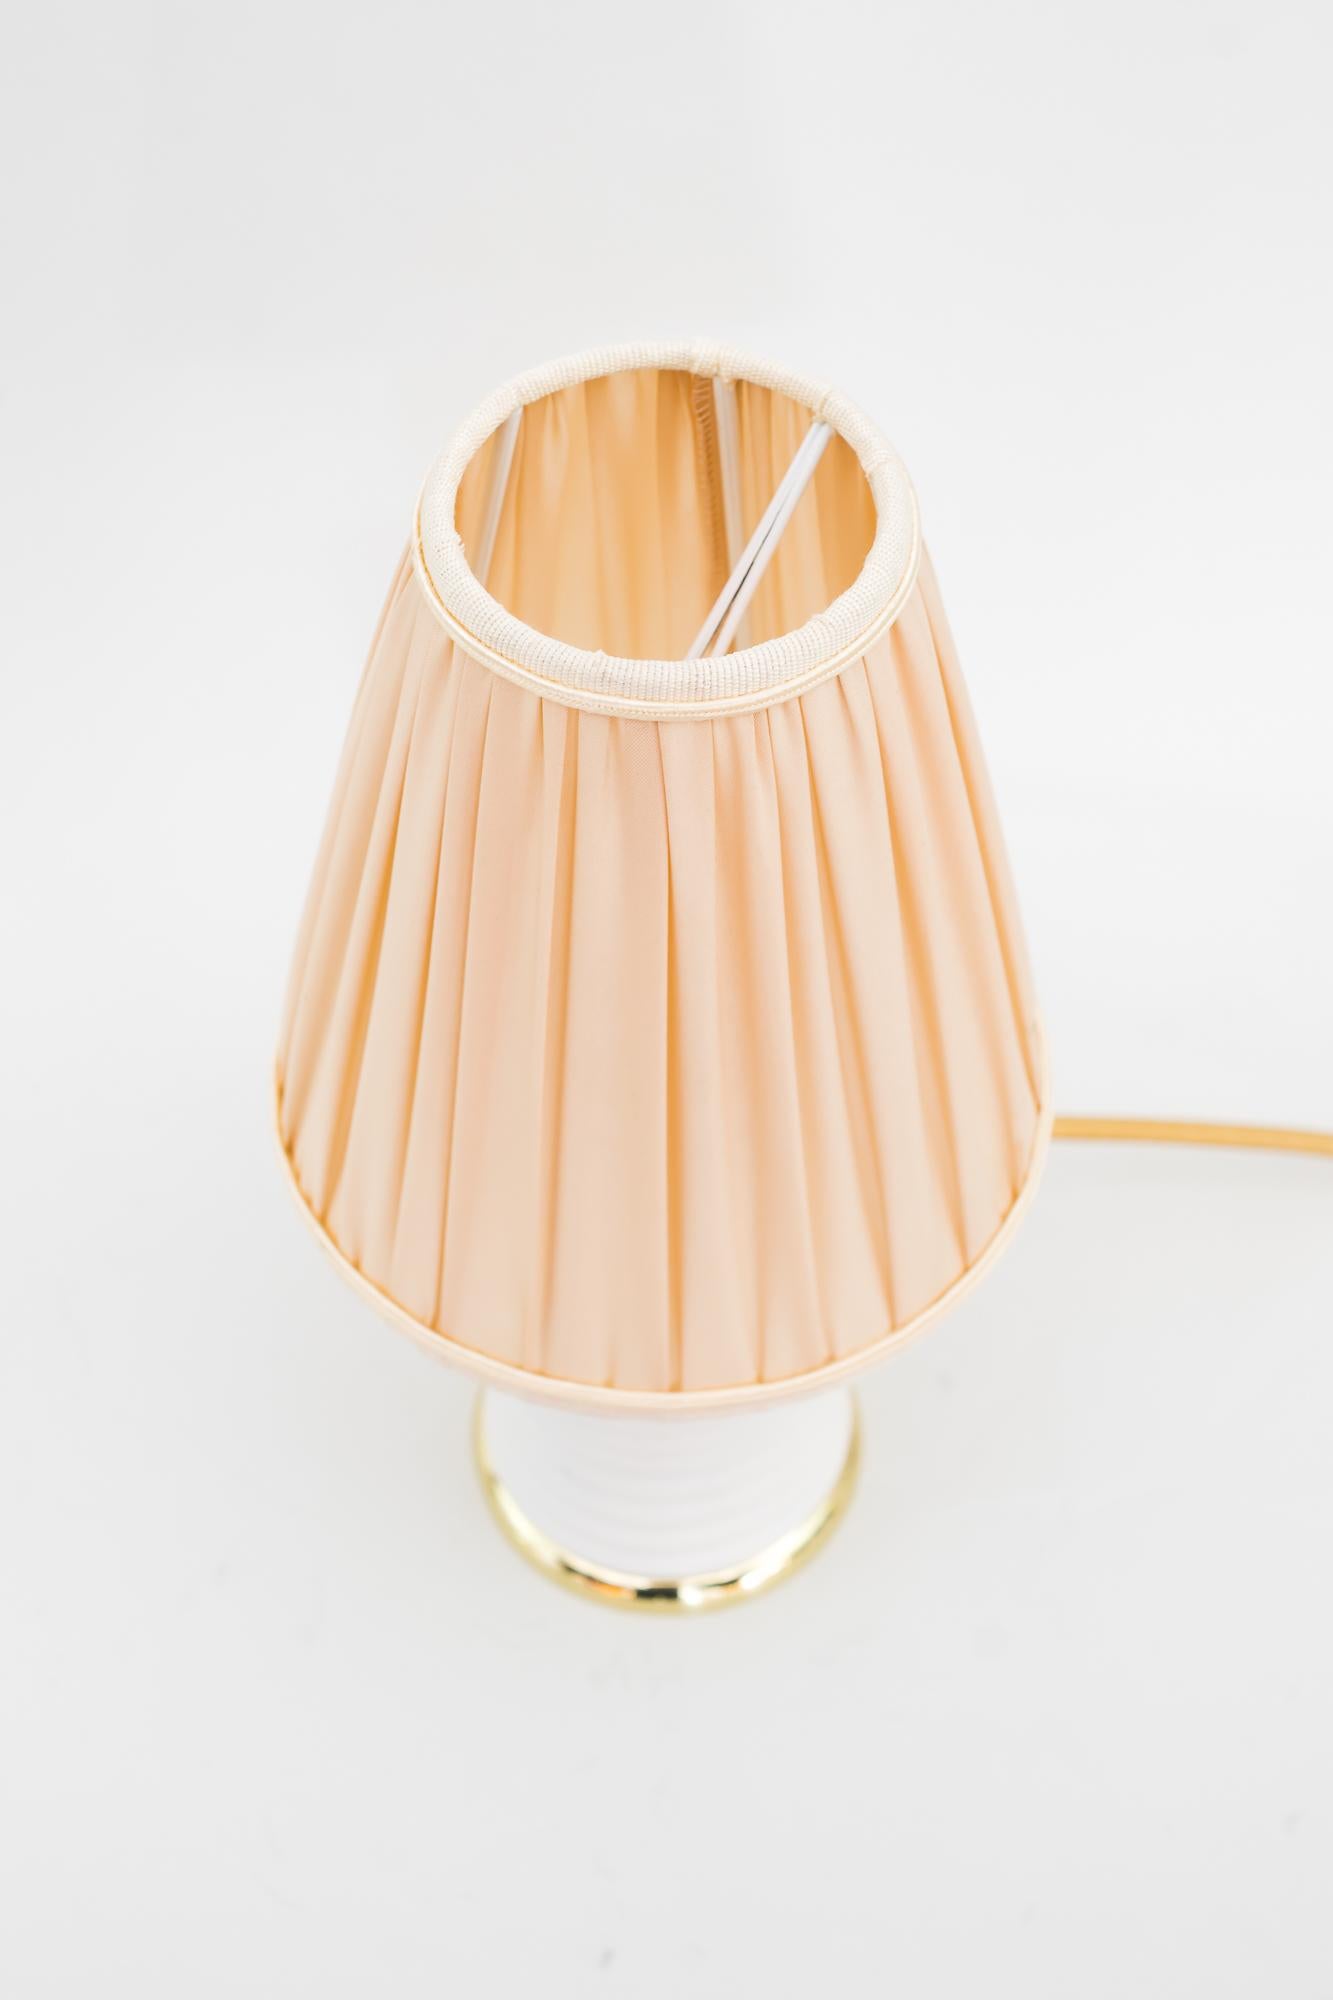 Mid-Century Modern Small Rupert Nikoll Table Lamp with Fabric Shade Around 1950s For Sale